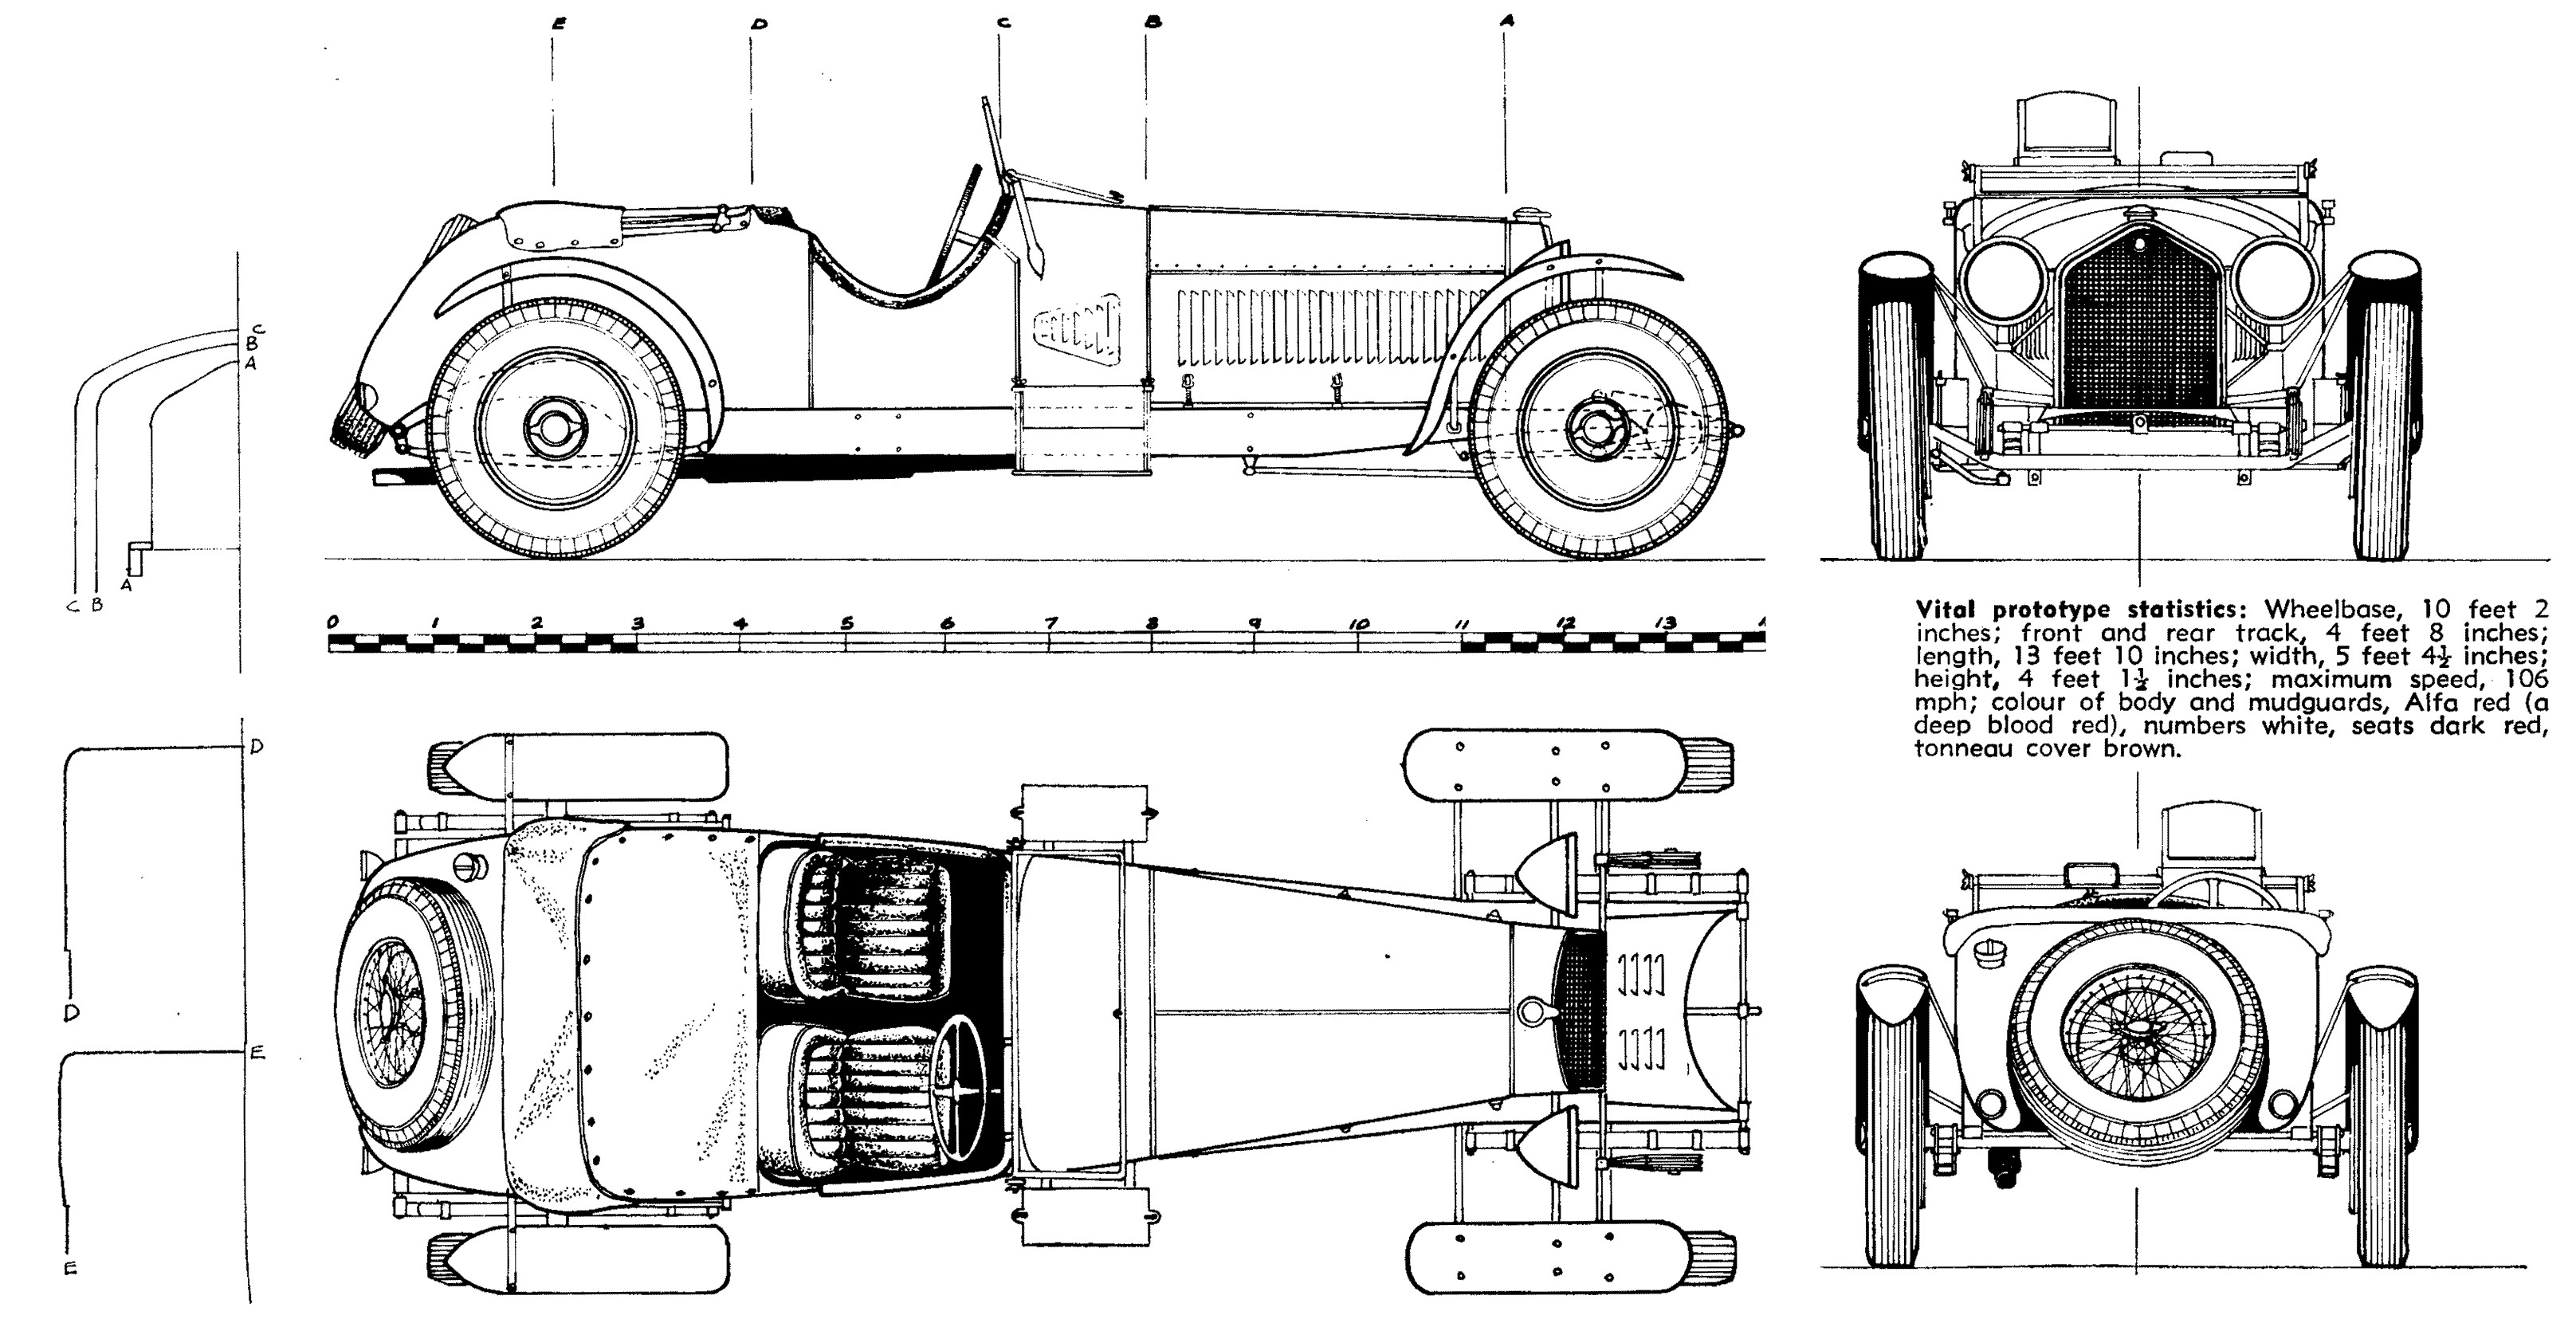 Diagram Of Car Chassis File0001lm31 3 2321 660 Ð¿Ð¸ÐºÑ Of Diagram Of Car Chassis